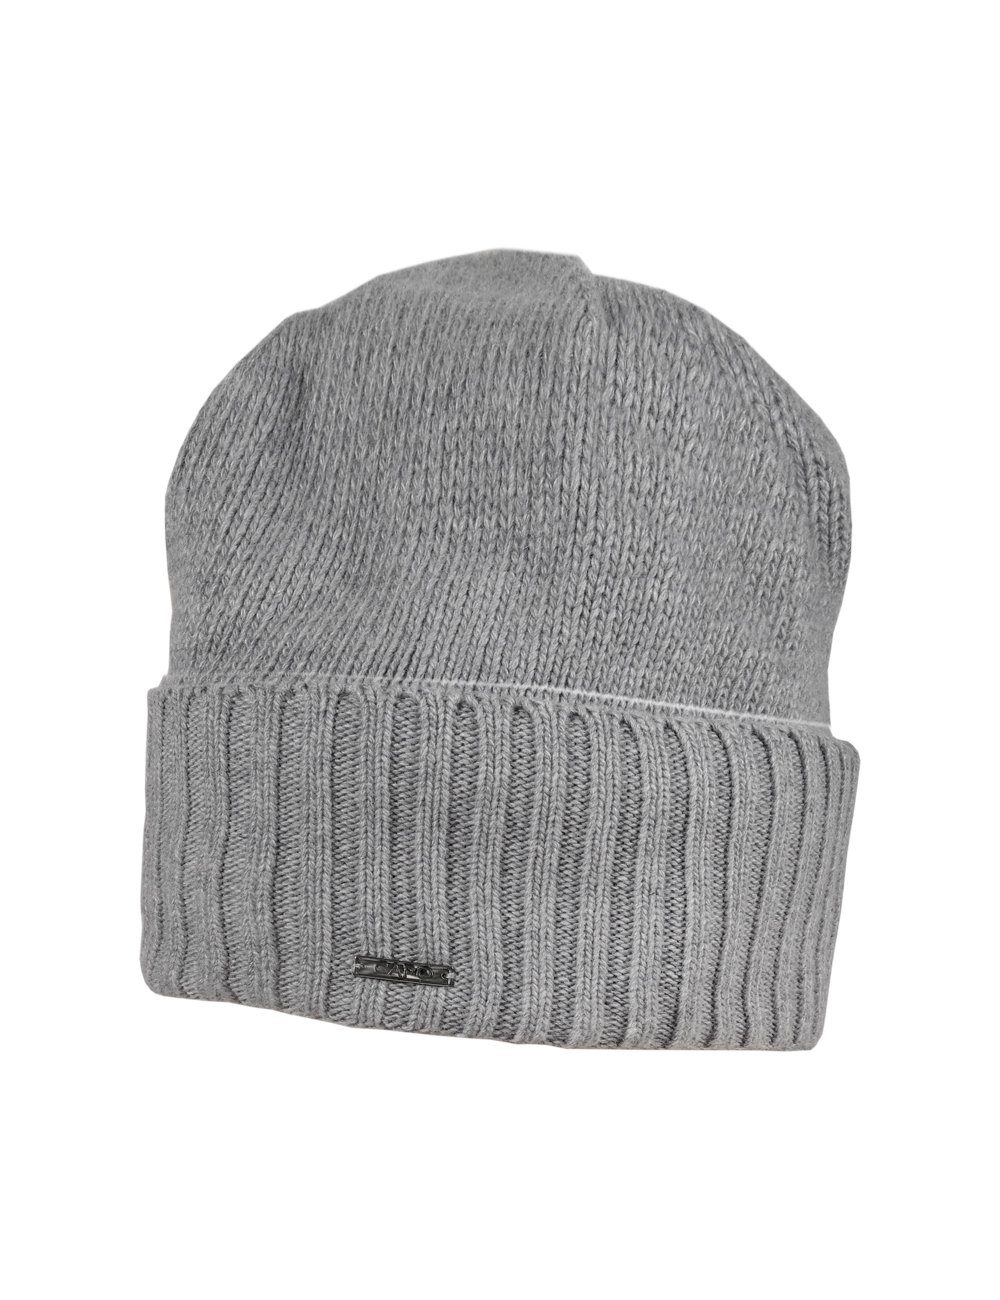 Made up knitted cap, Strickmütze silver CAP ribbed turn CAPO plain CAPO-HEAVEN Europe in